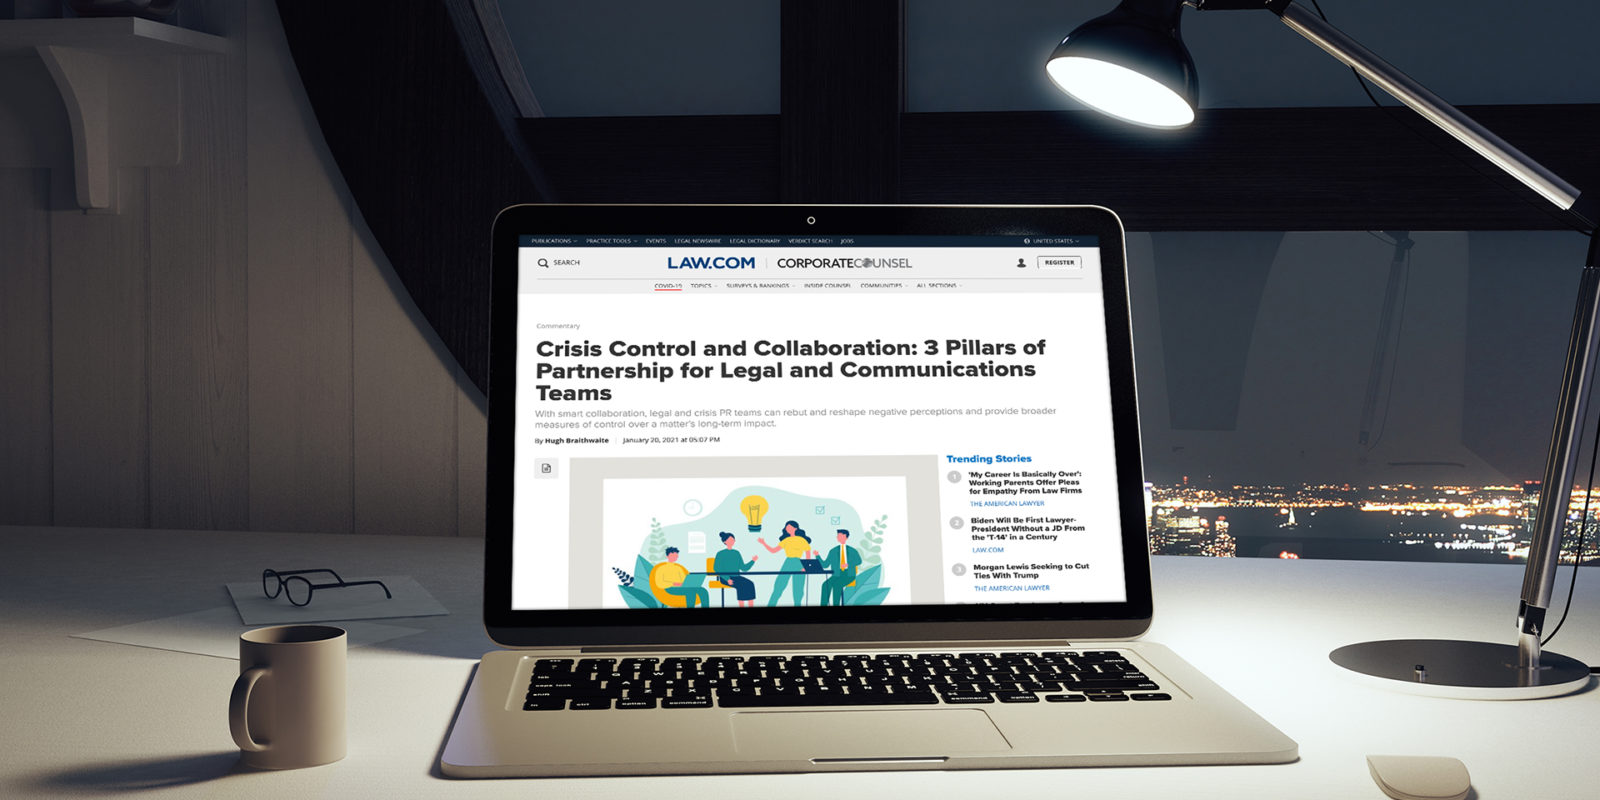 Feature: Law.com Article on Partnership Between Legal and Communications Pros